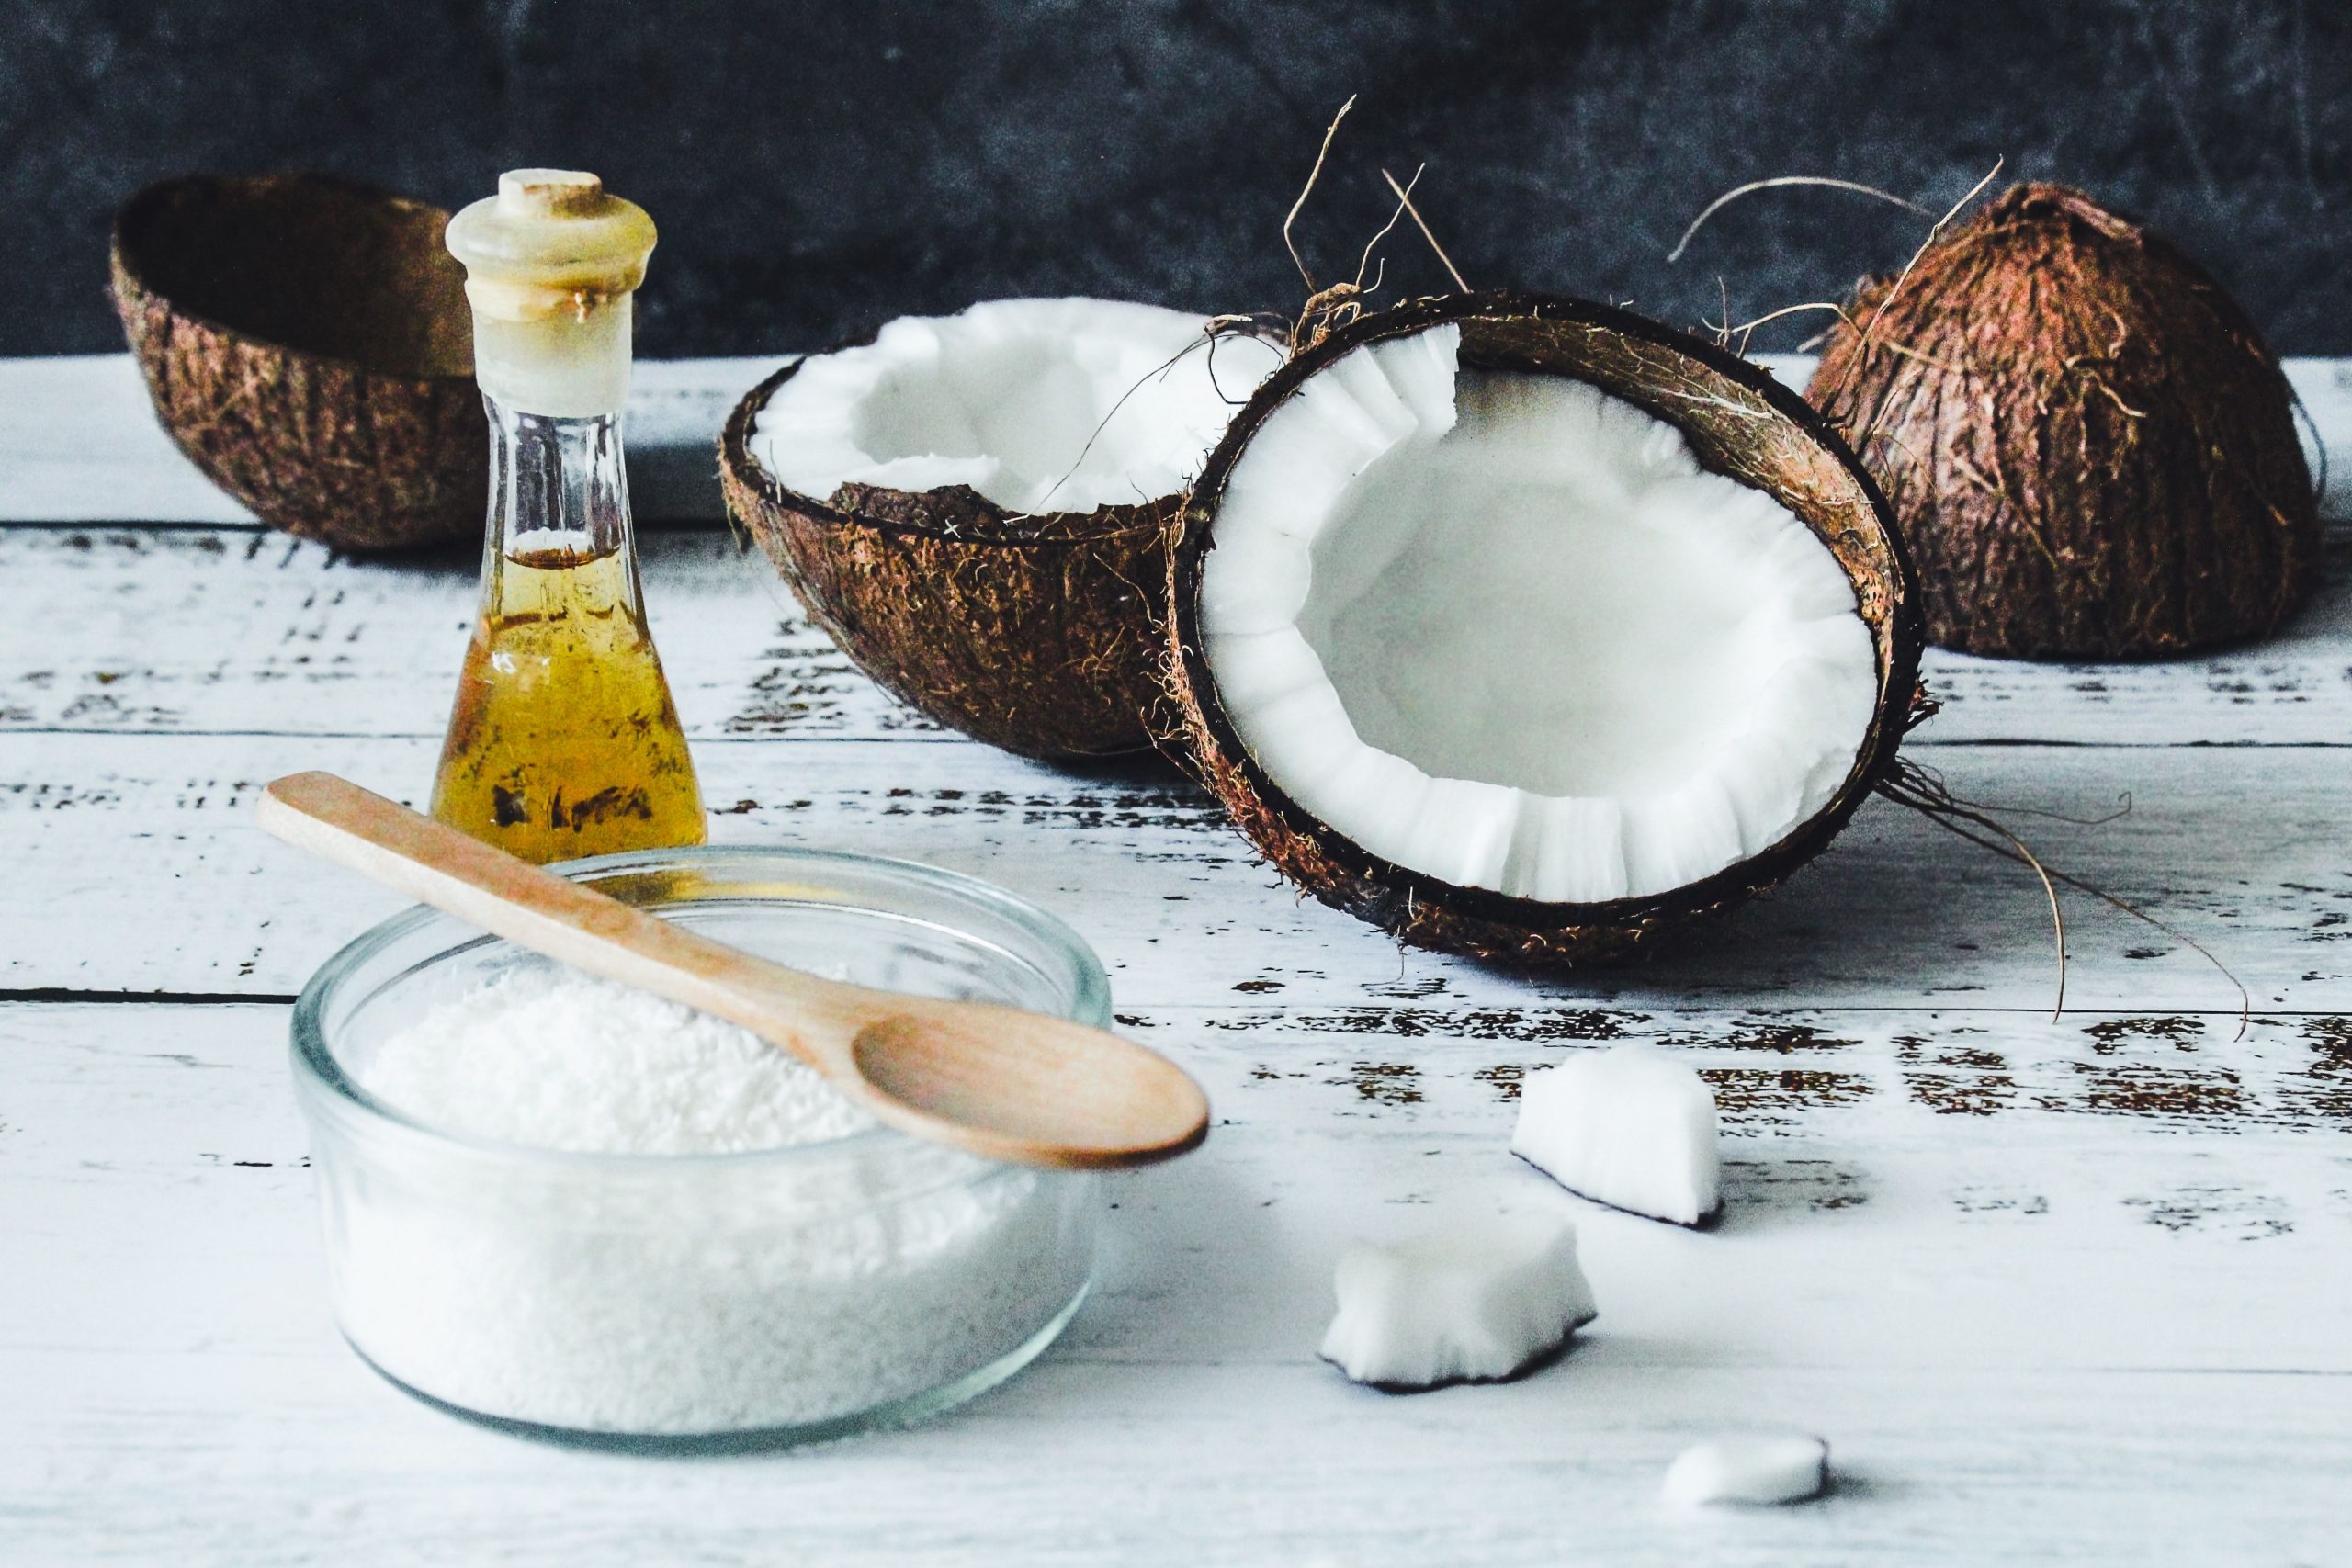 Two easy methods to make coconut cream at home